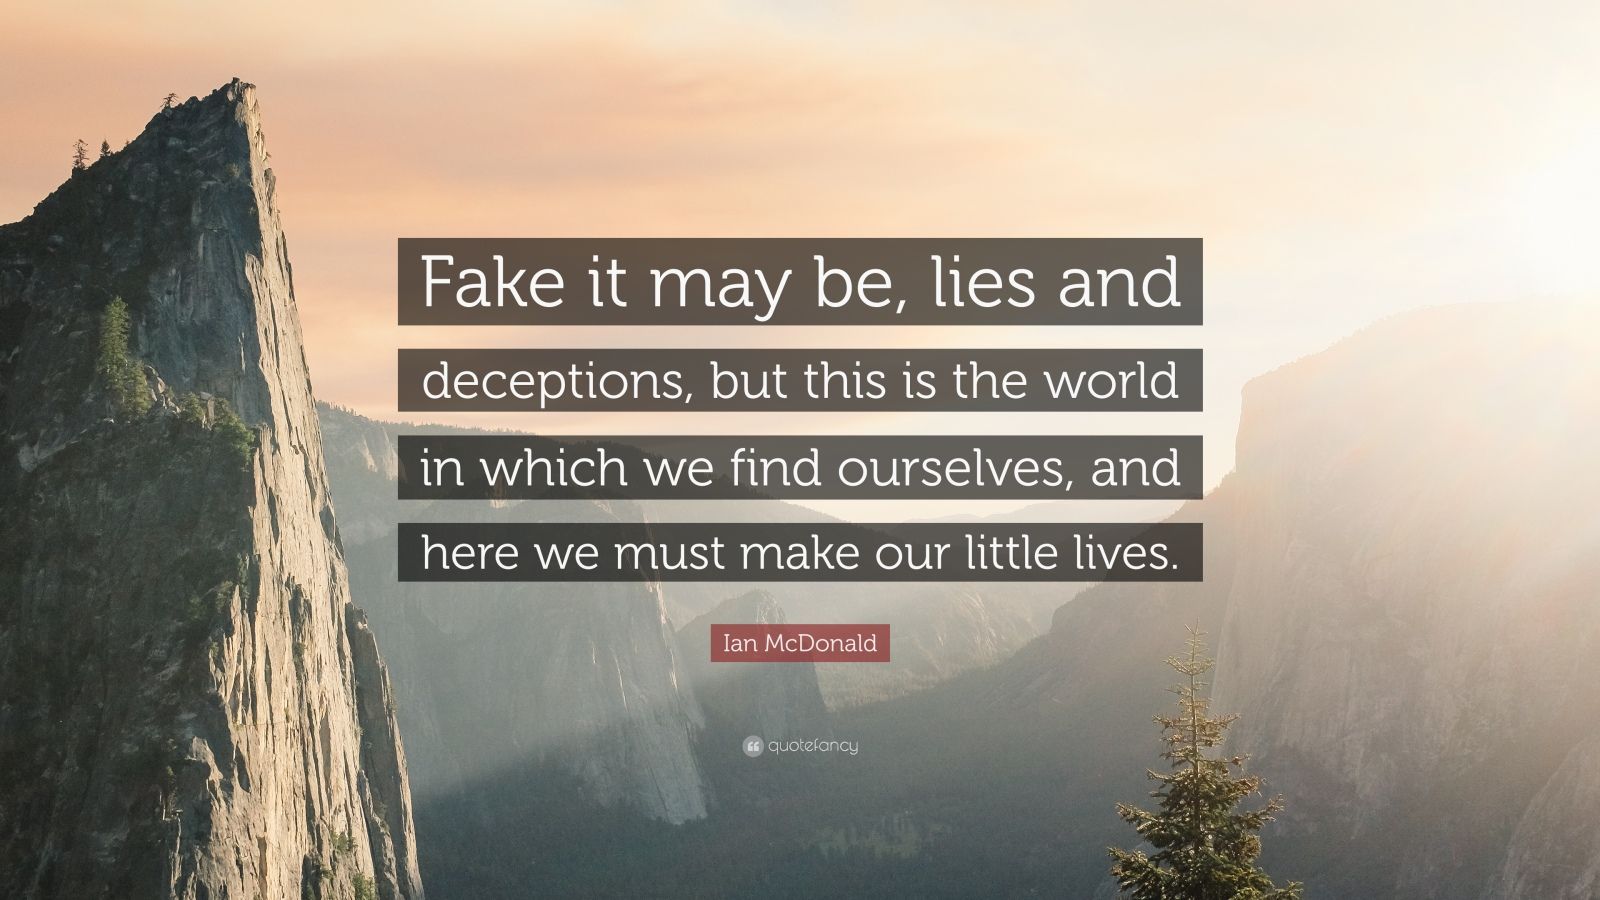 Ian McDonald Quote: “Fake it may be, lies and deceptions, but this ...